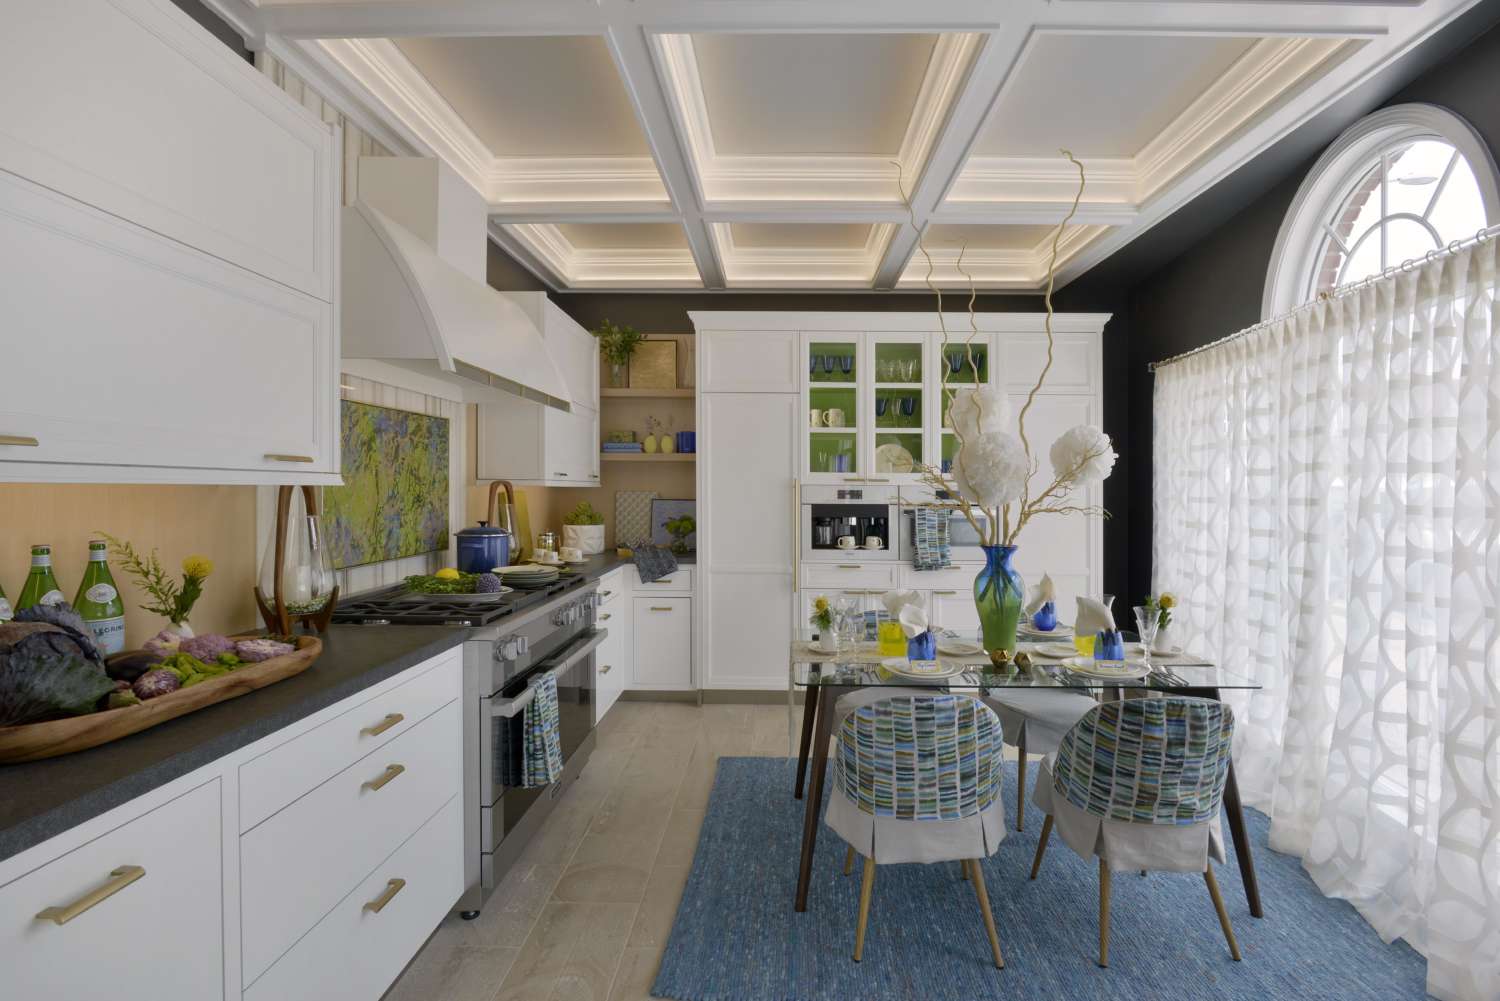 White cabinetry has green interior